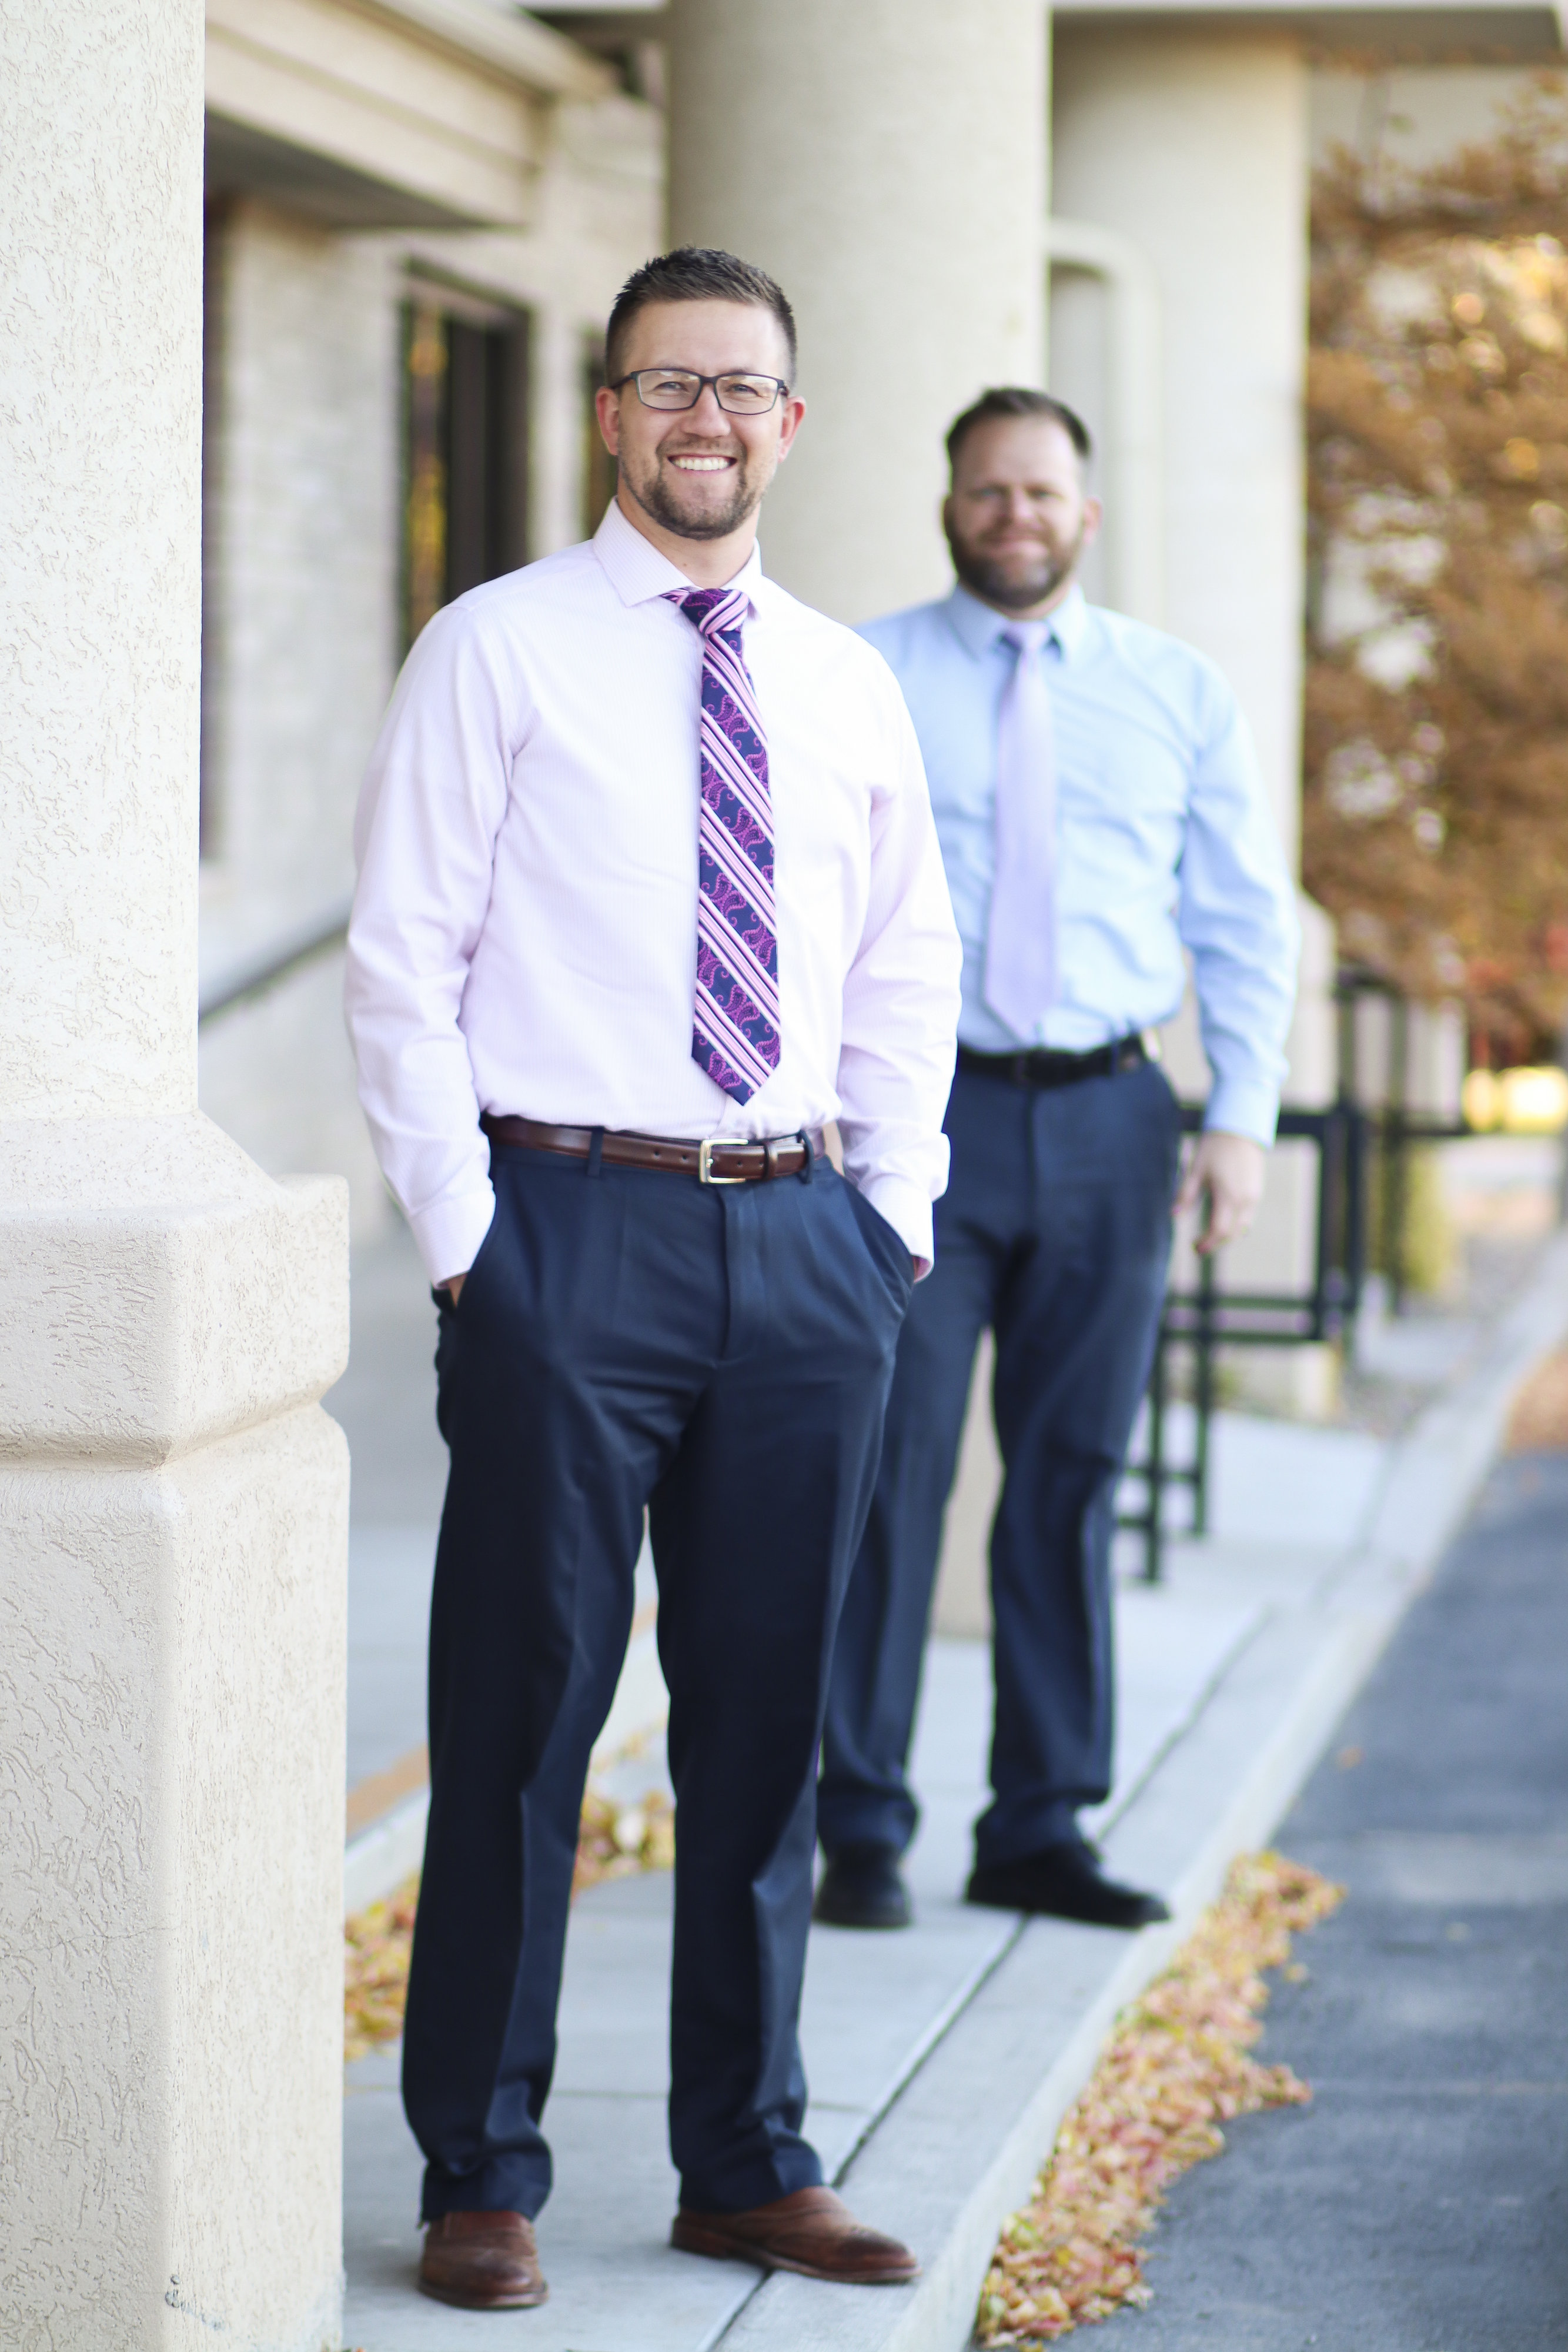 Twin Falls Chiropractor Dr. Tanner Wray